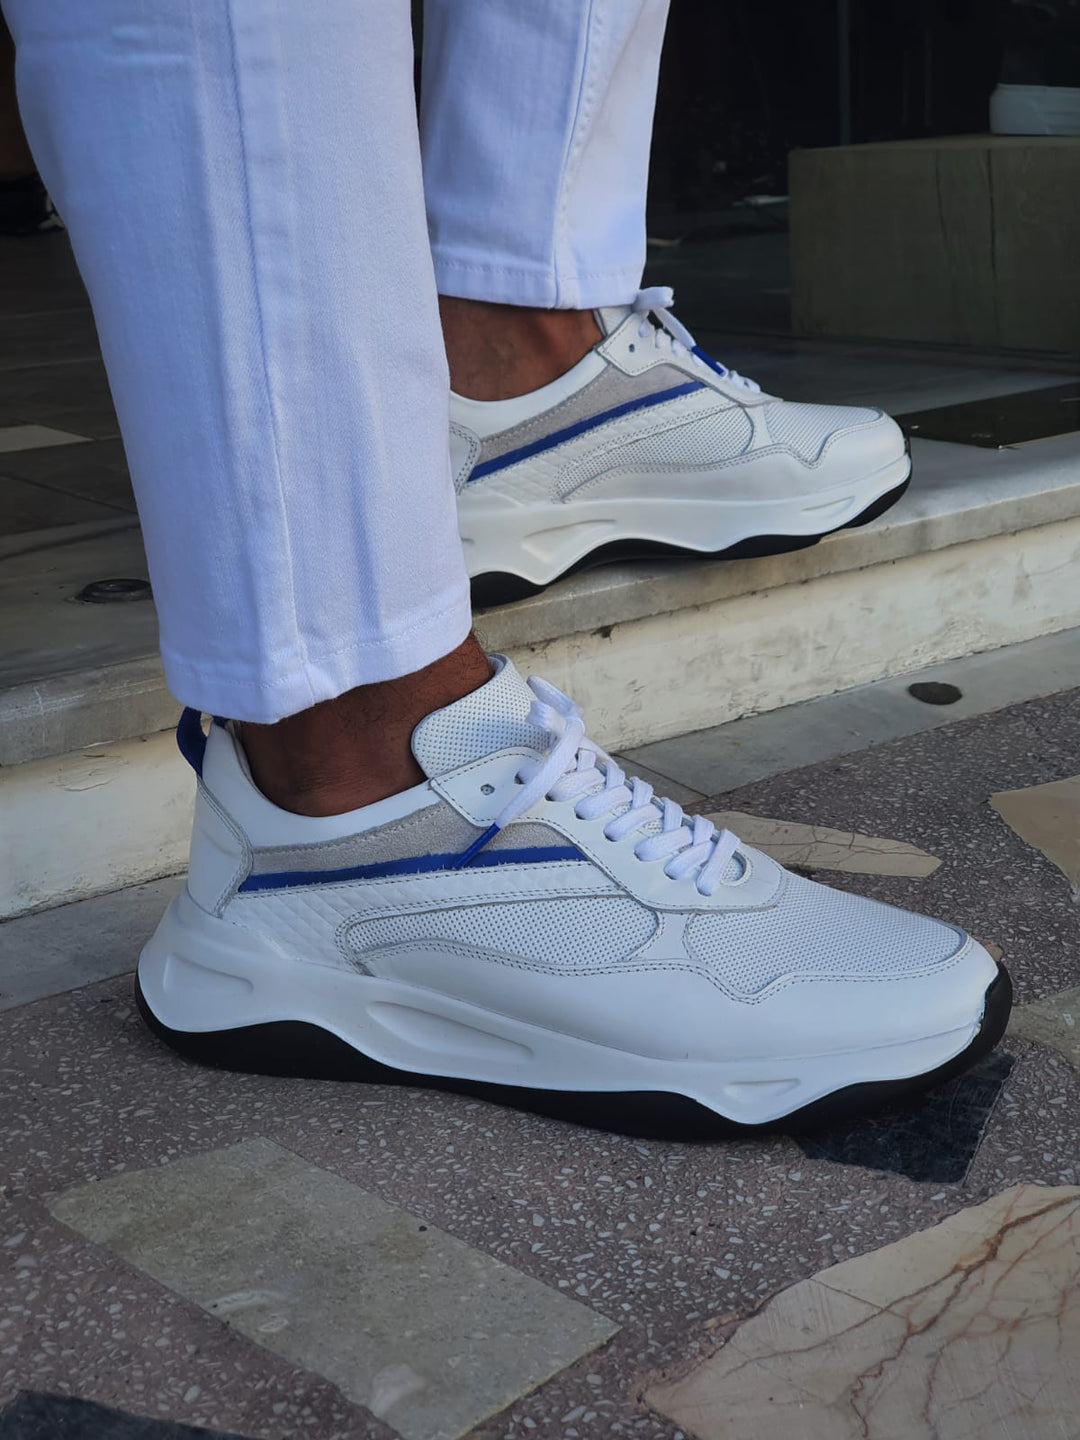 Dior B22 Blue/White Sneaker Review & On Foot 